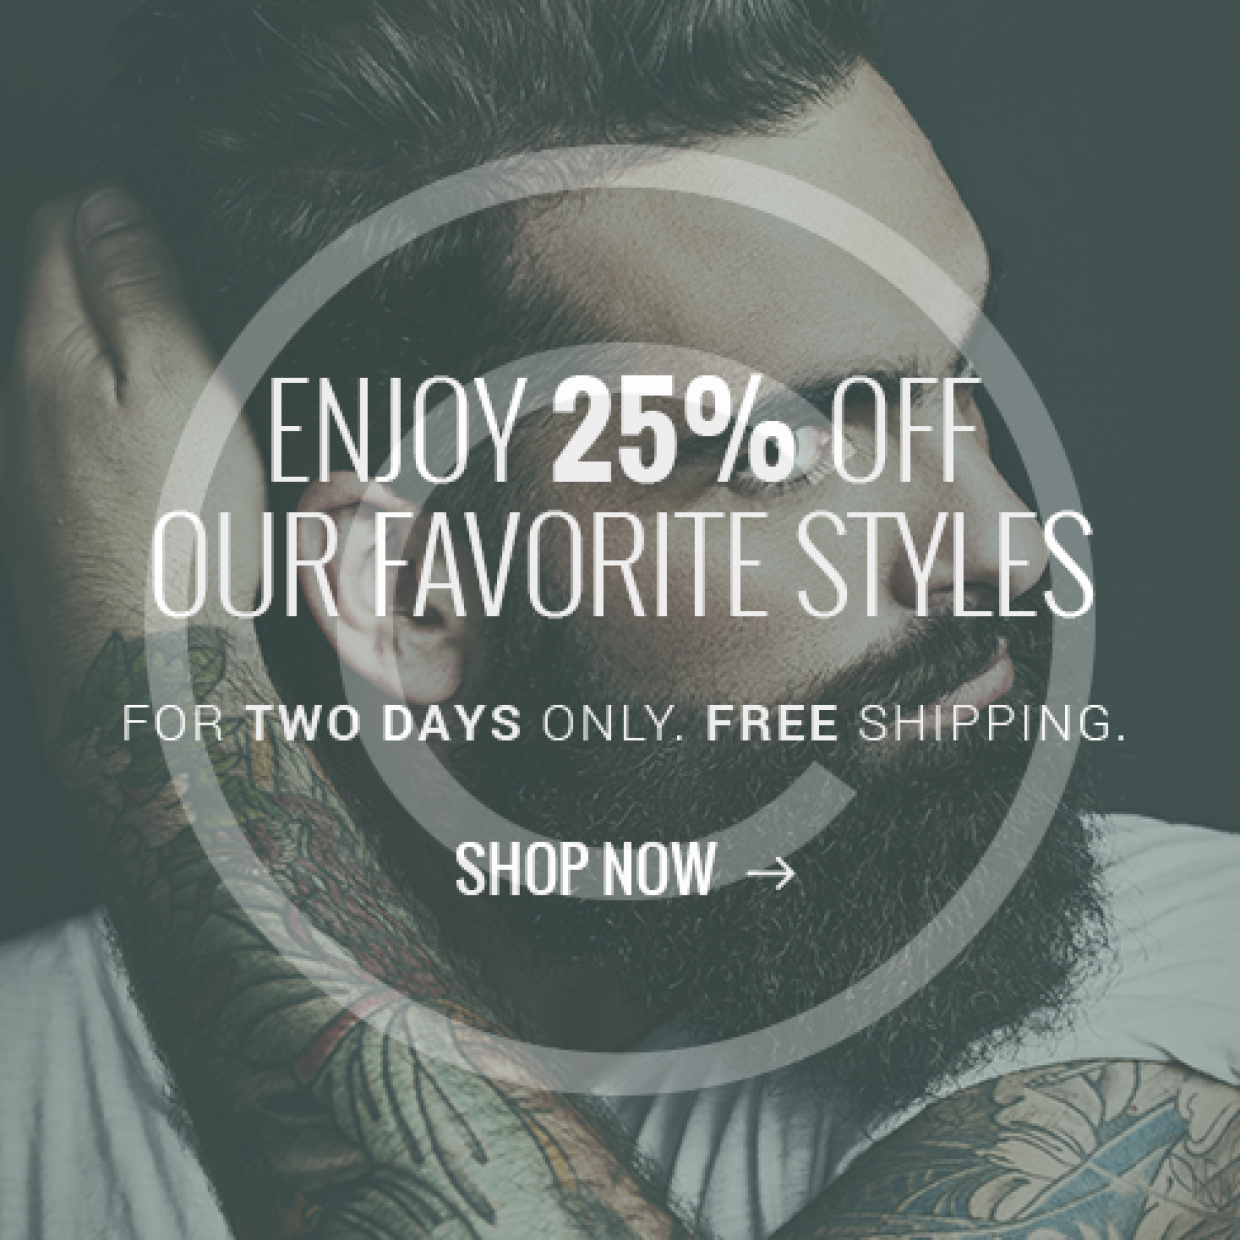 Enjoy 25% off our favorite styles